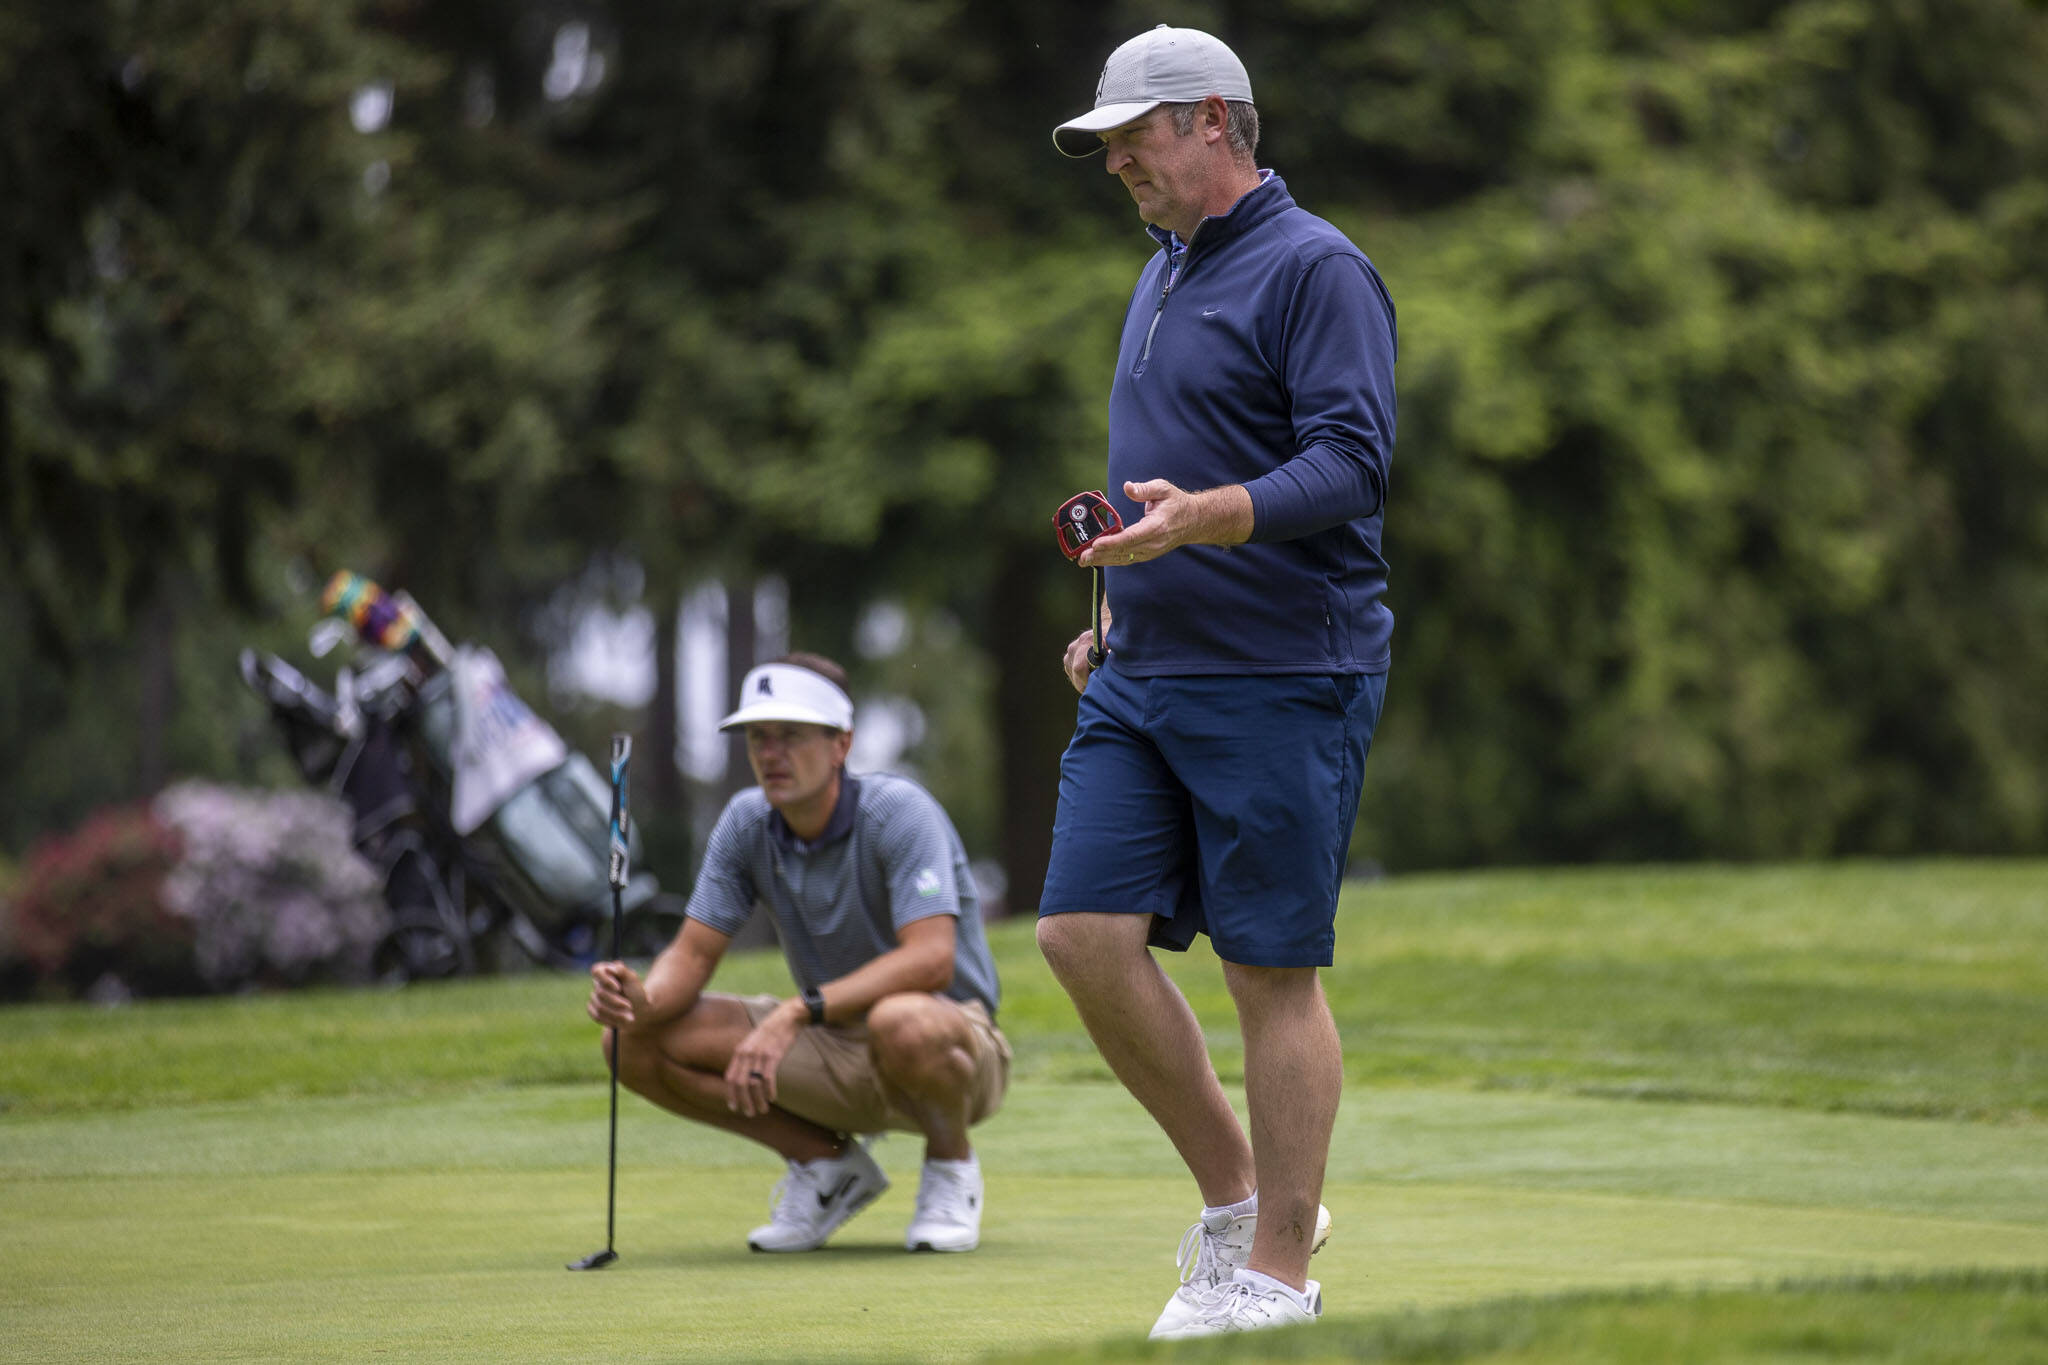 Jacob Rohde surveys the area at Everett Golf & Country Club during last year’s final round of the Snohomish County Amateur golf tournament. The three-time champion is among this year’s favorites. (Annie Barker / The Herald)